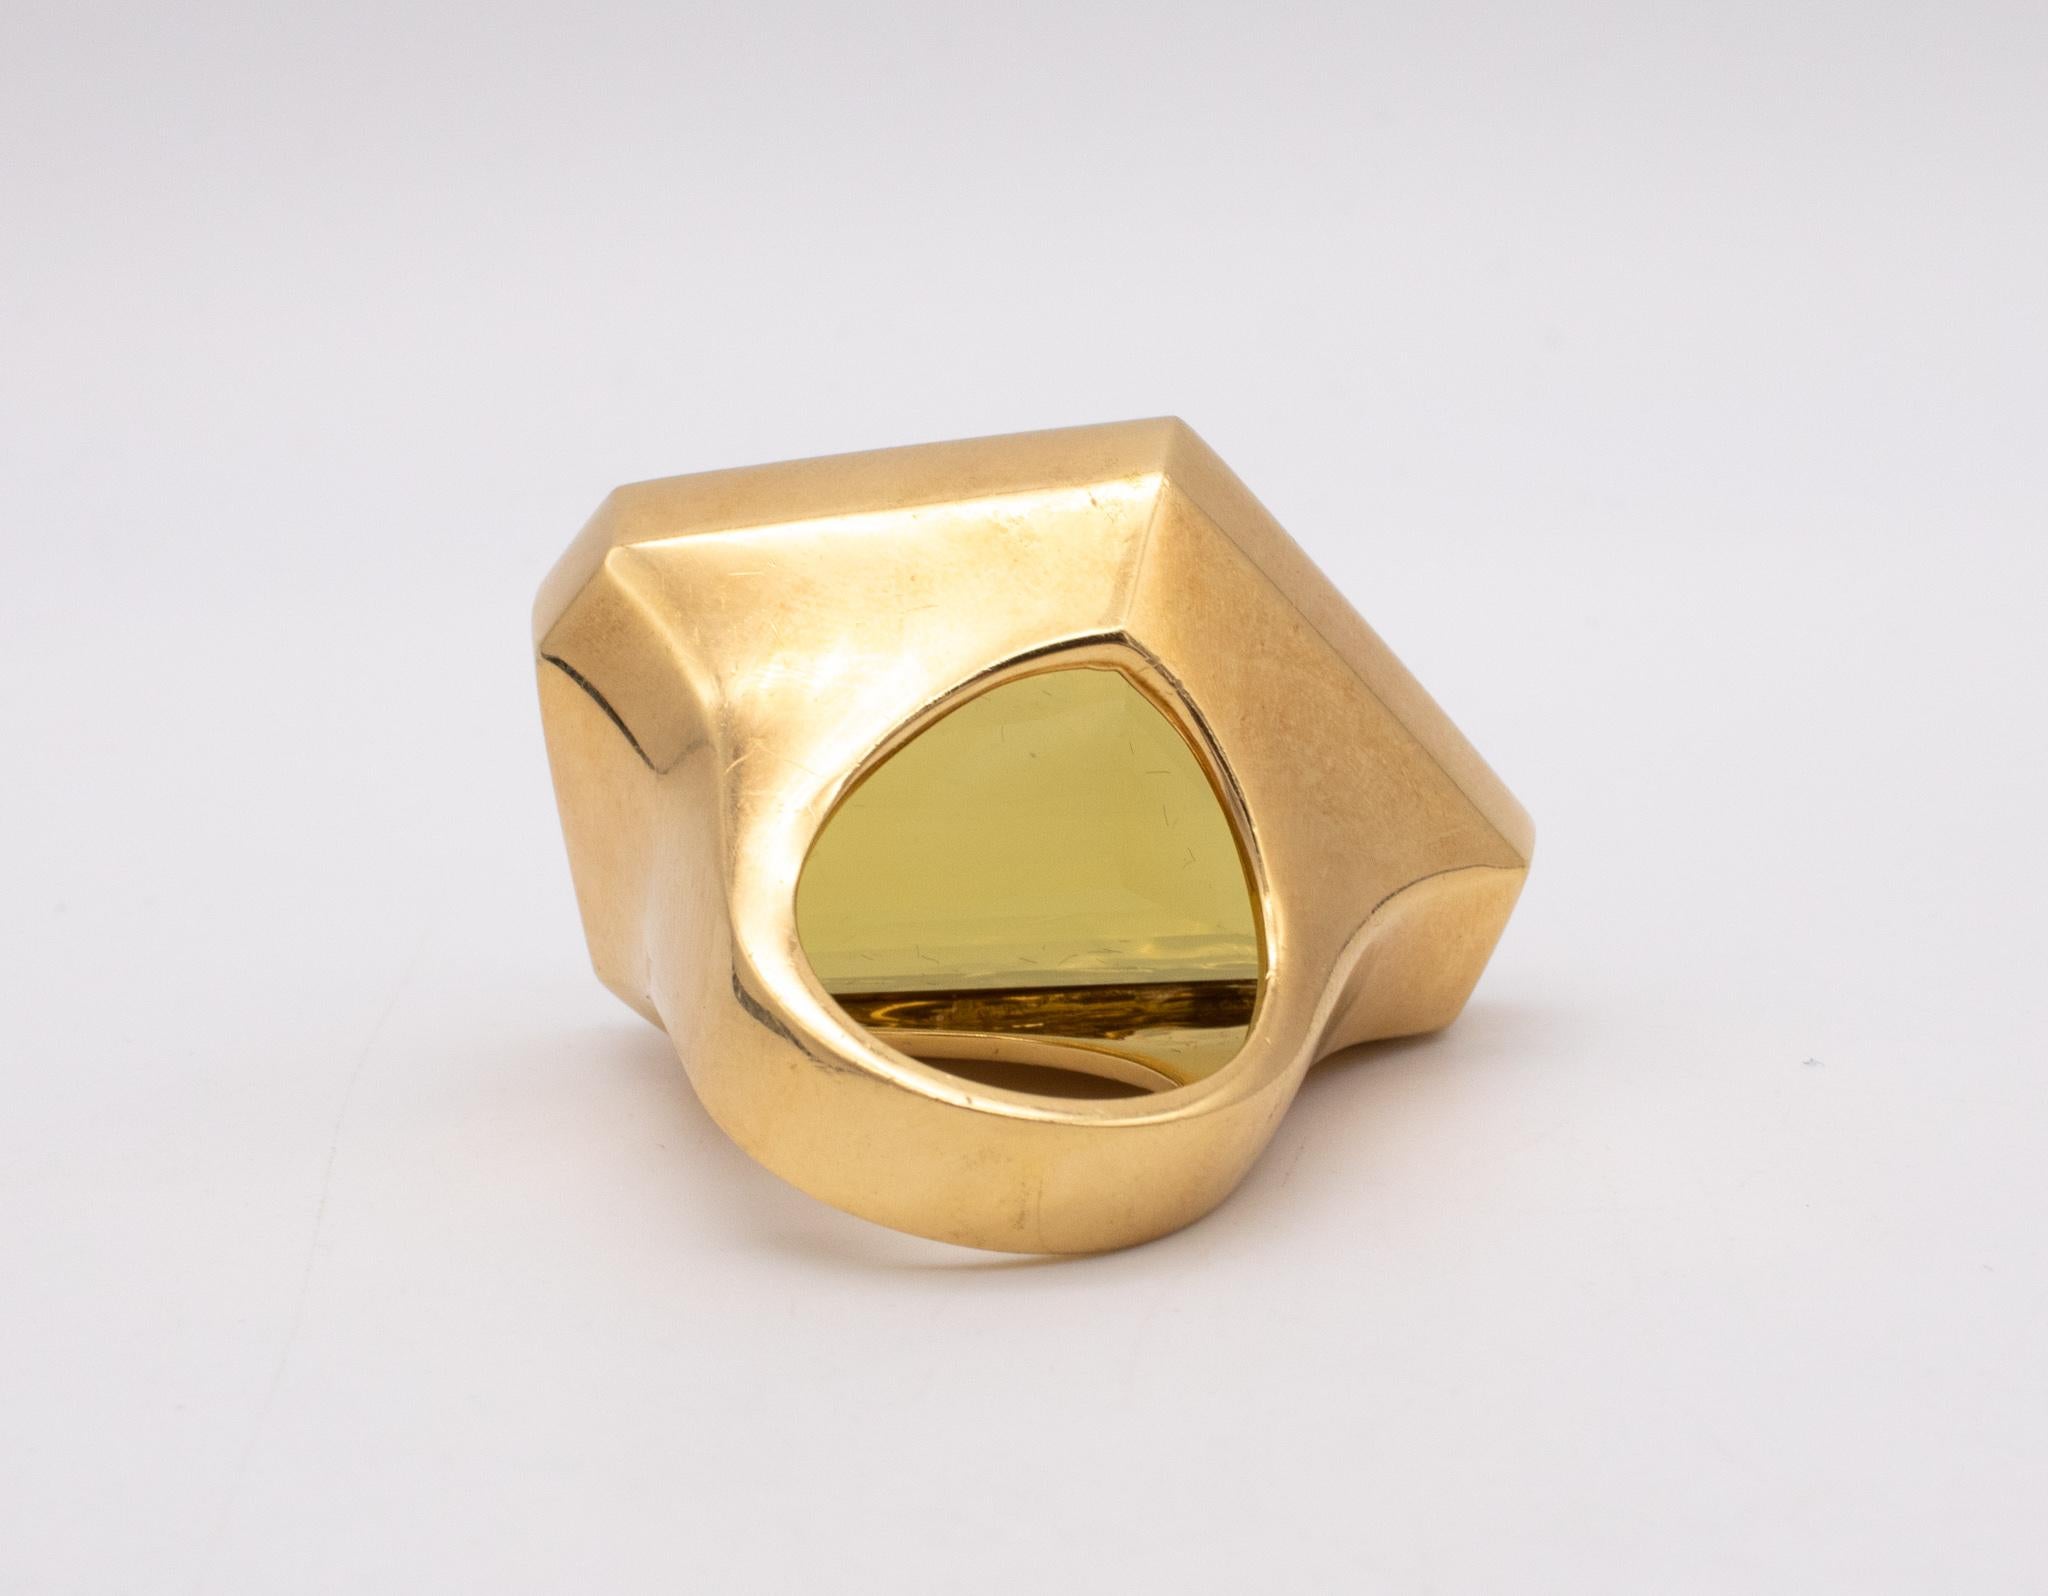 Tony Duquette Massive Geometric Cocktail Ring 18 Karat Yellow Gold 85cts Citrine For Sale 1